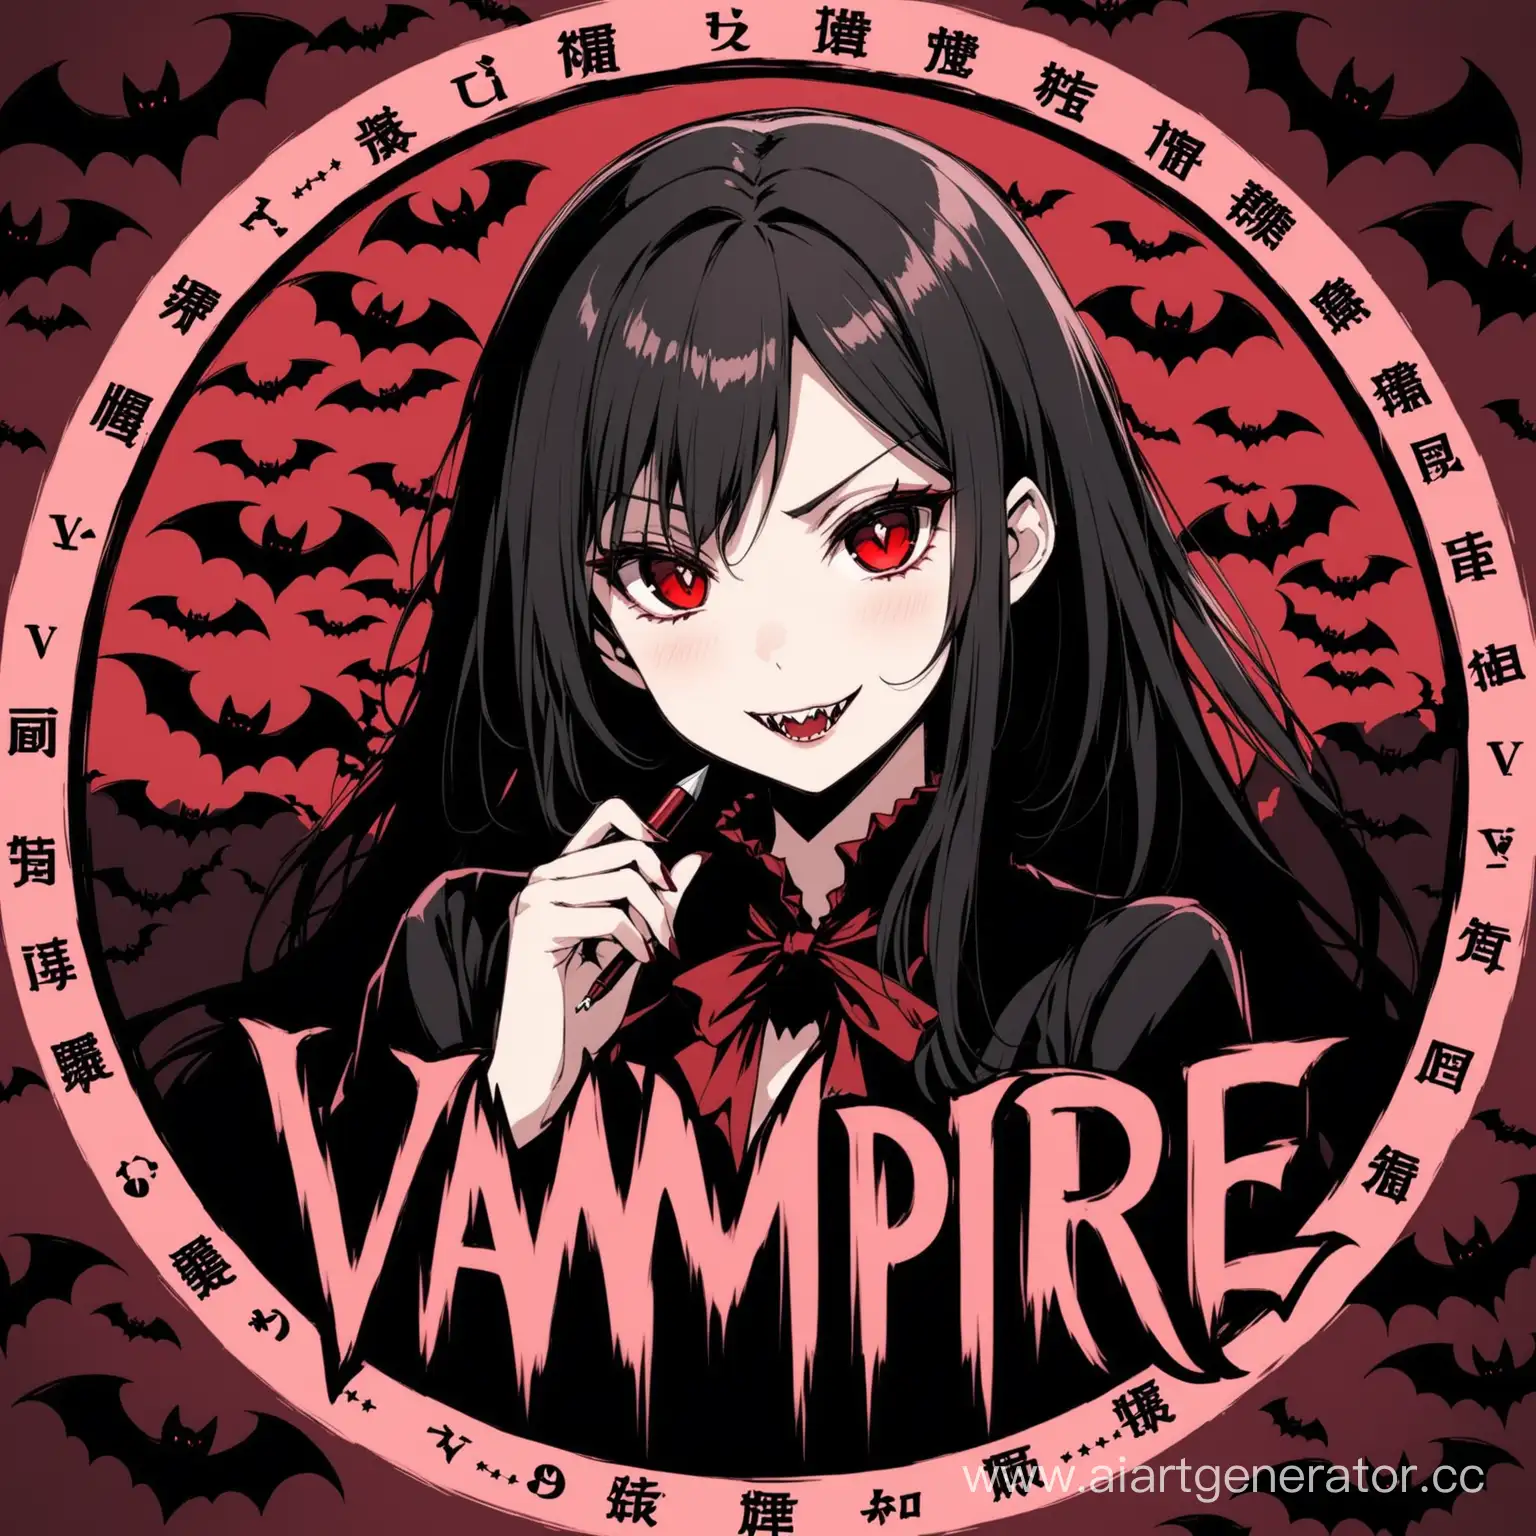 Anime vampire woman, dark tones, bats in the background, circle the girl and the inscription with an outline, write the word in the middle - VV83